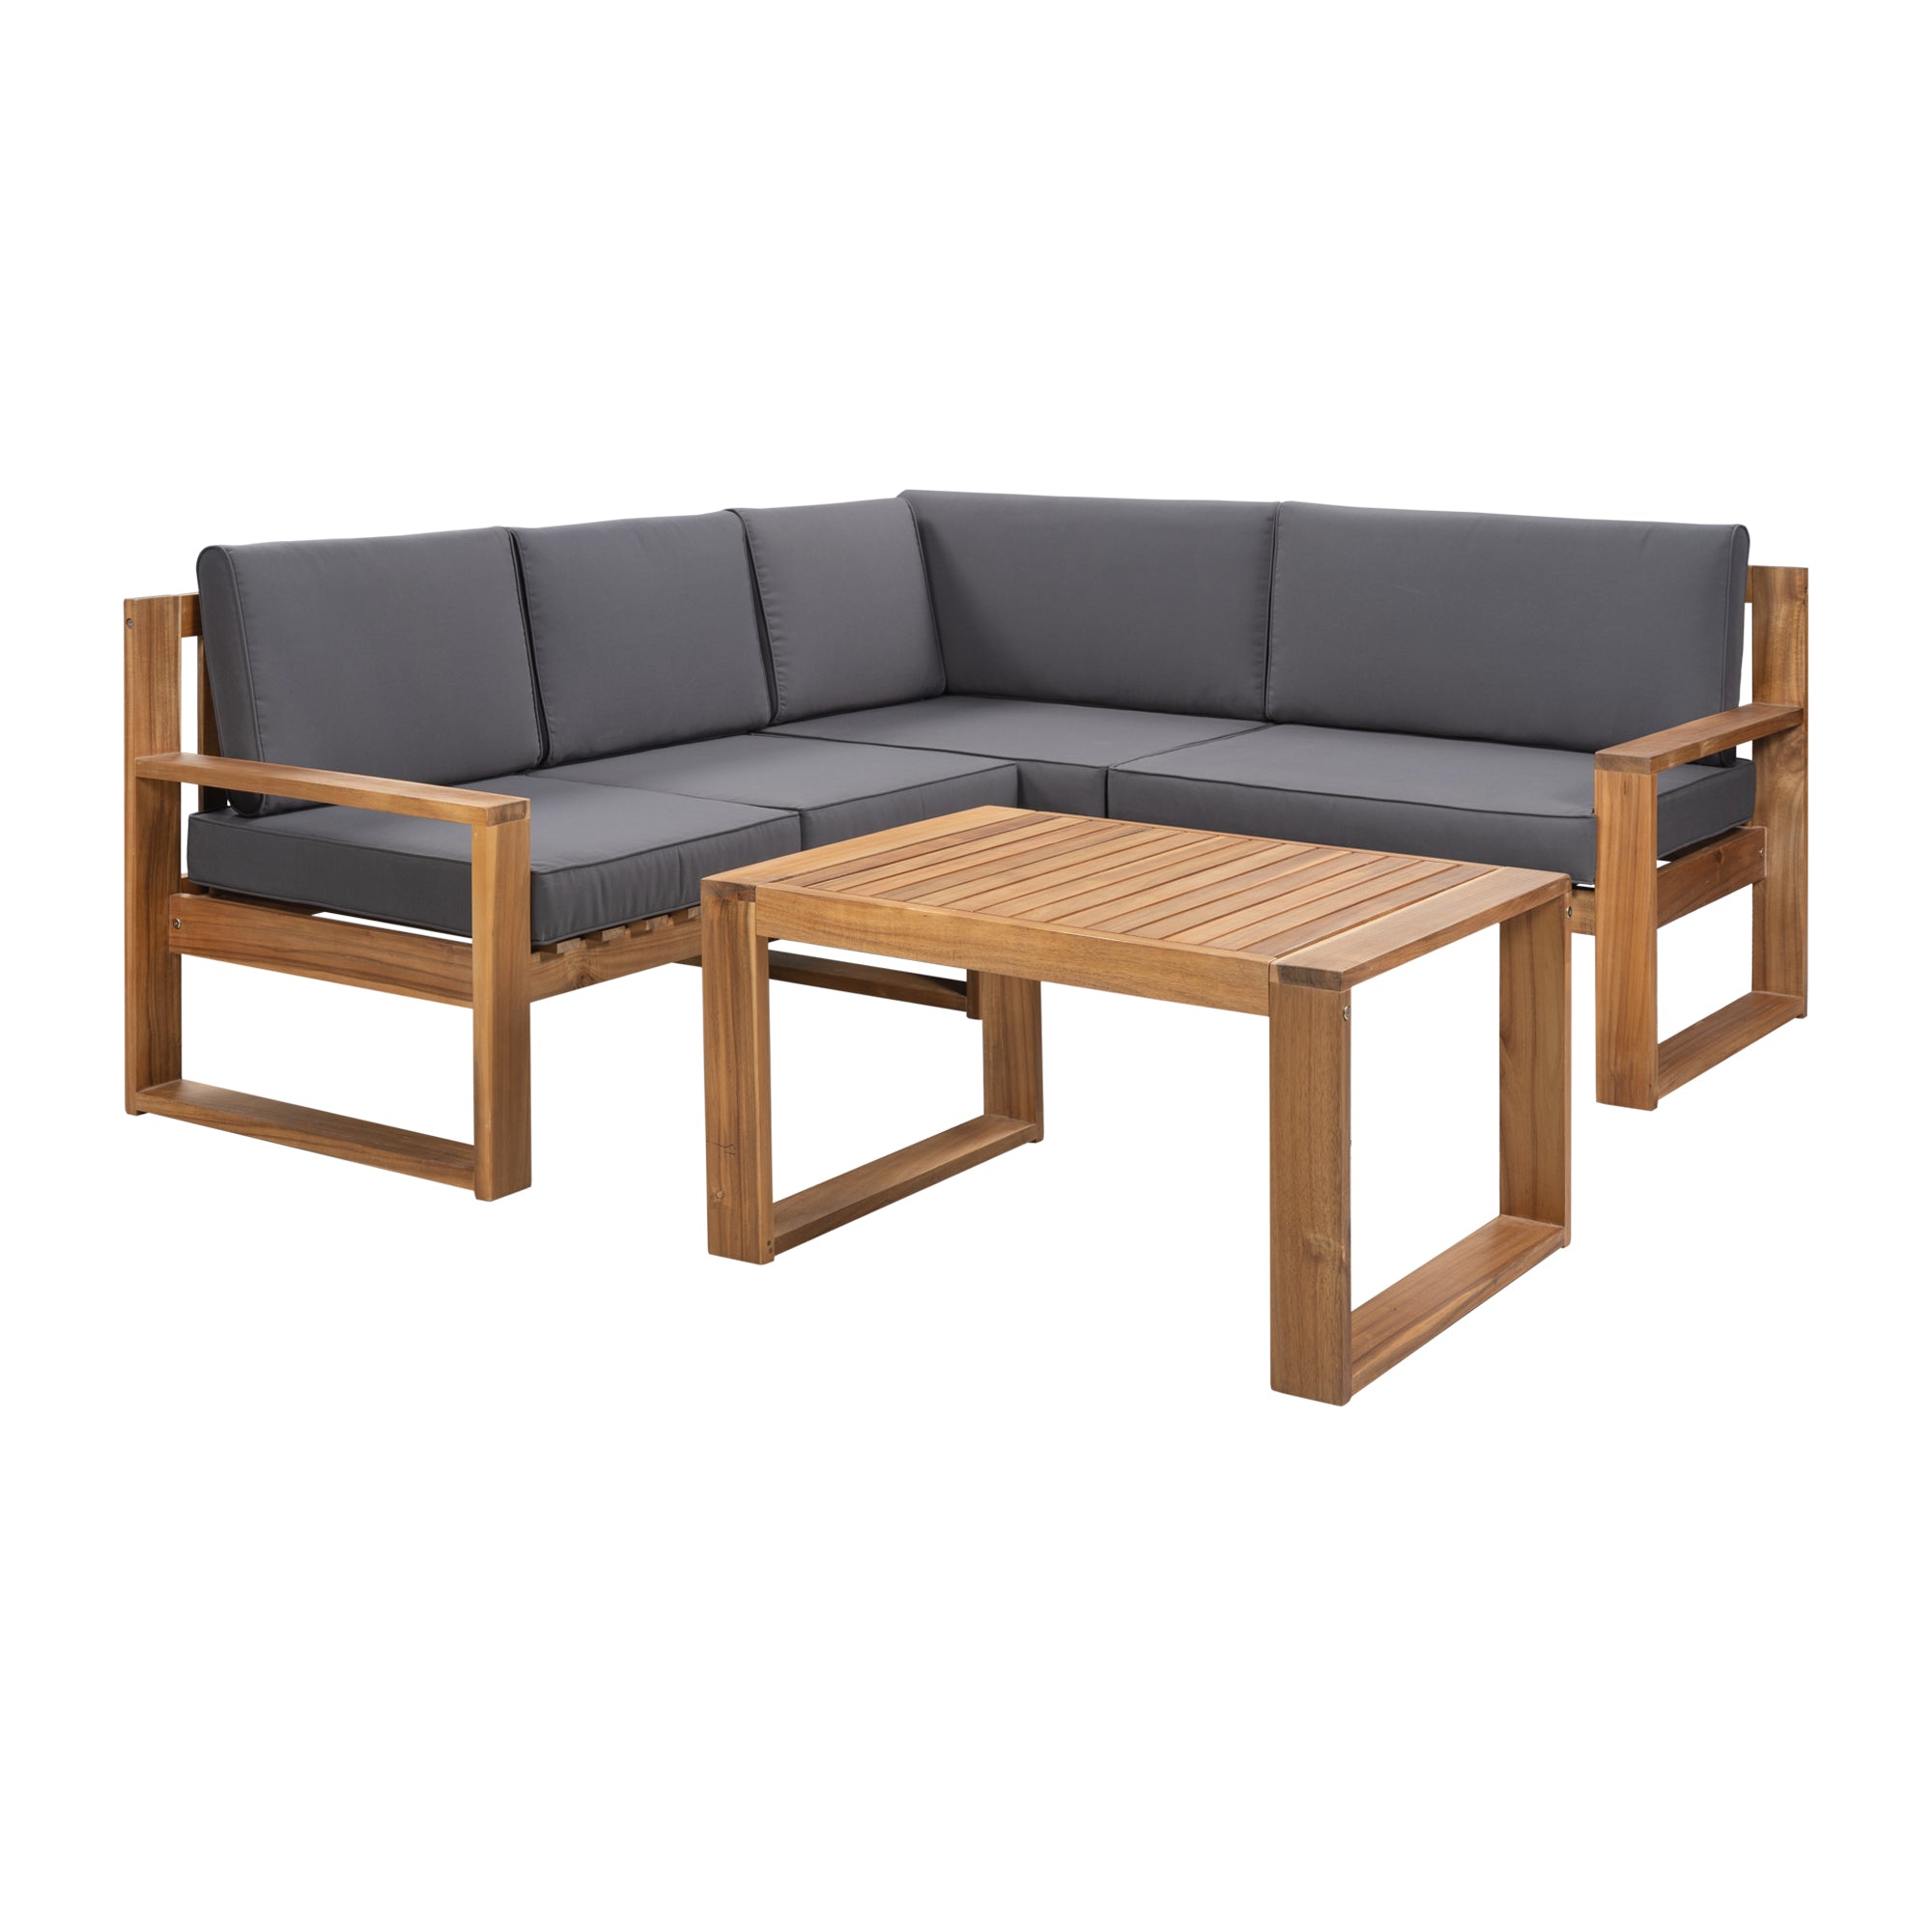 3-Piece Patio Sectional Set Acacia Wood and Grey Cushions  for Outdoors and Indoors-Boyel Living